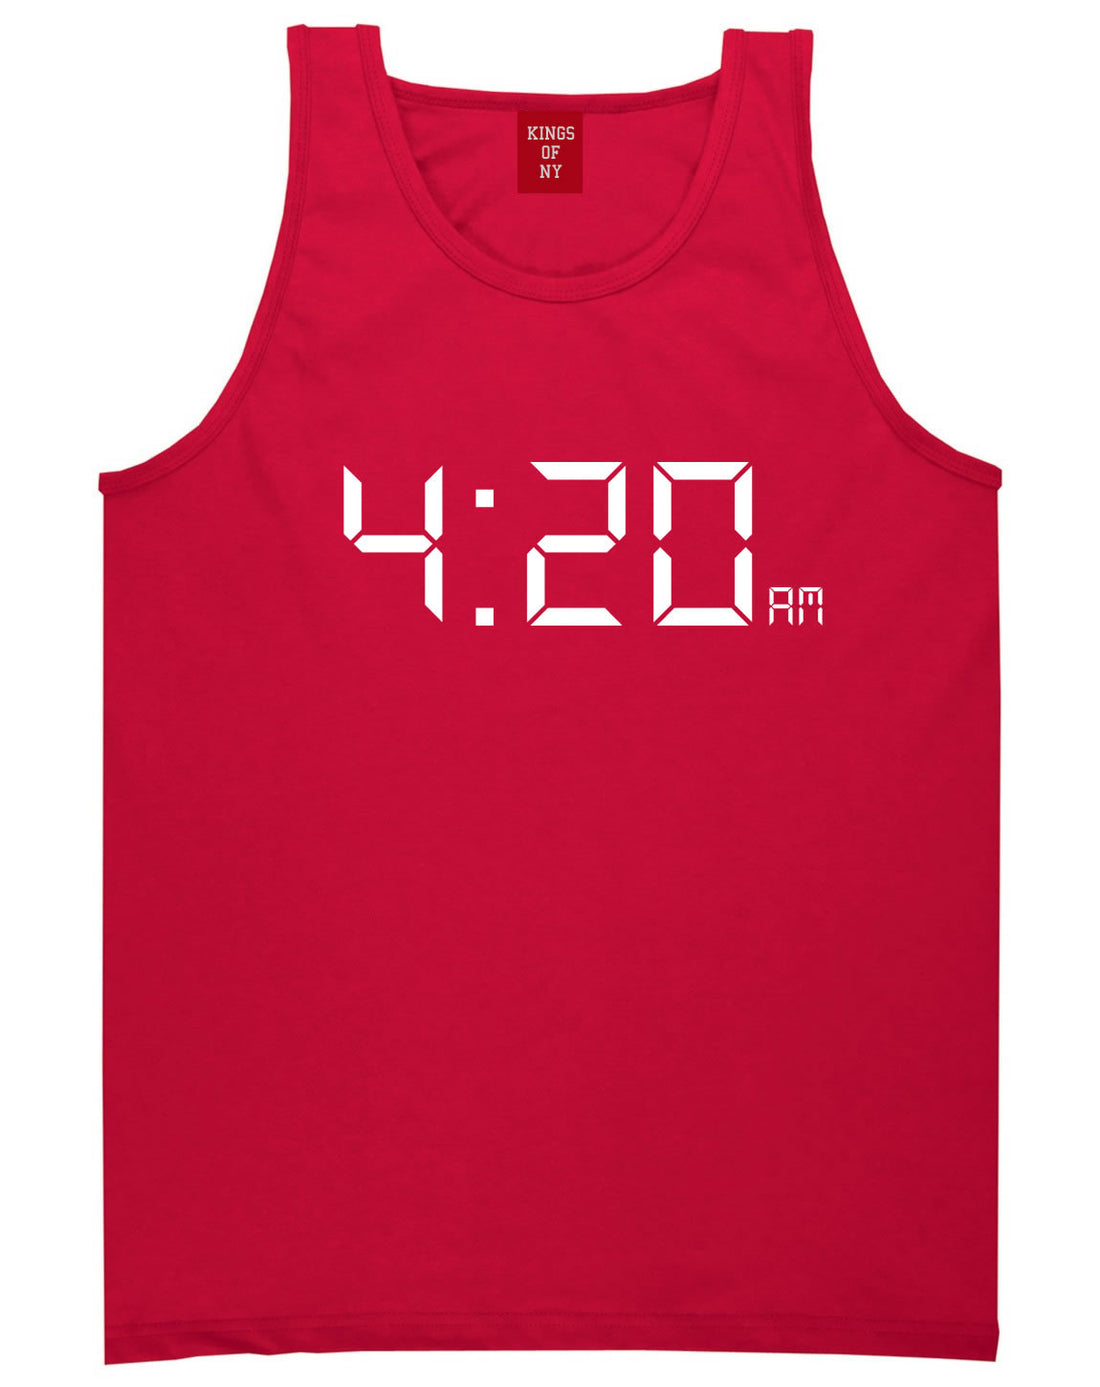 420 Time Weed Somker Tank Top in Red By Kings Of NY